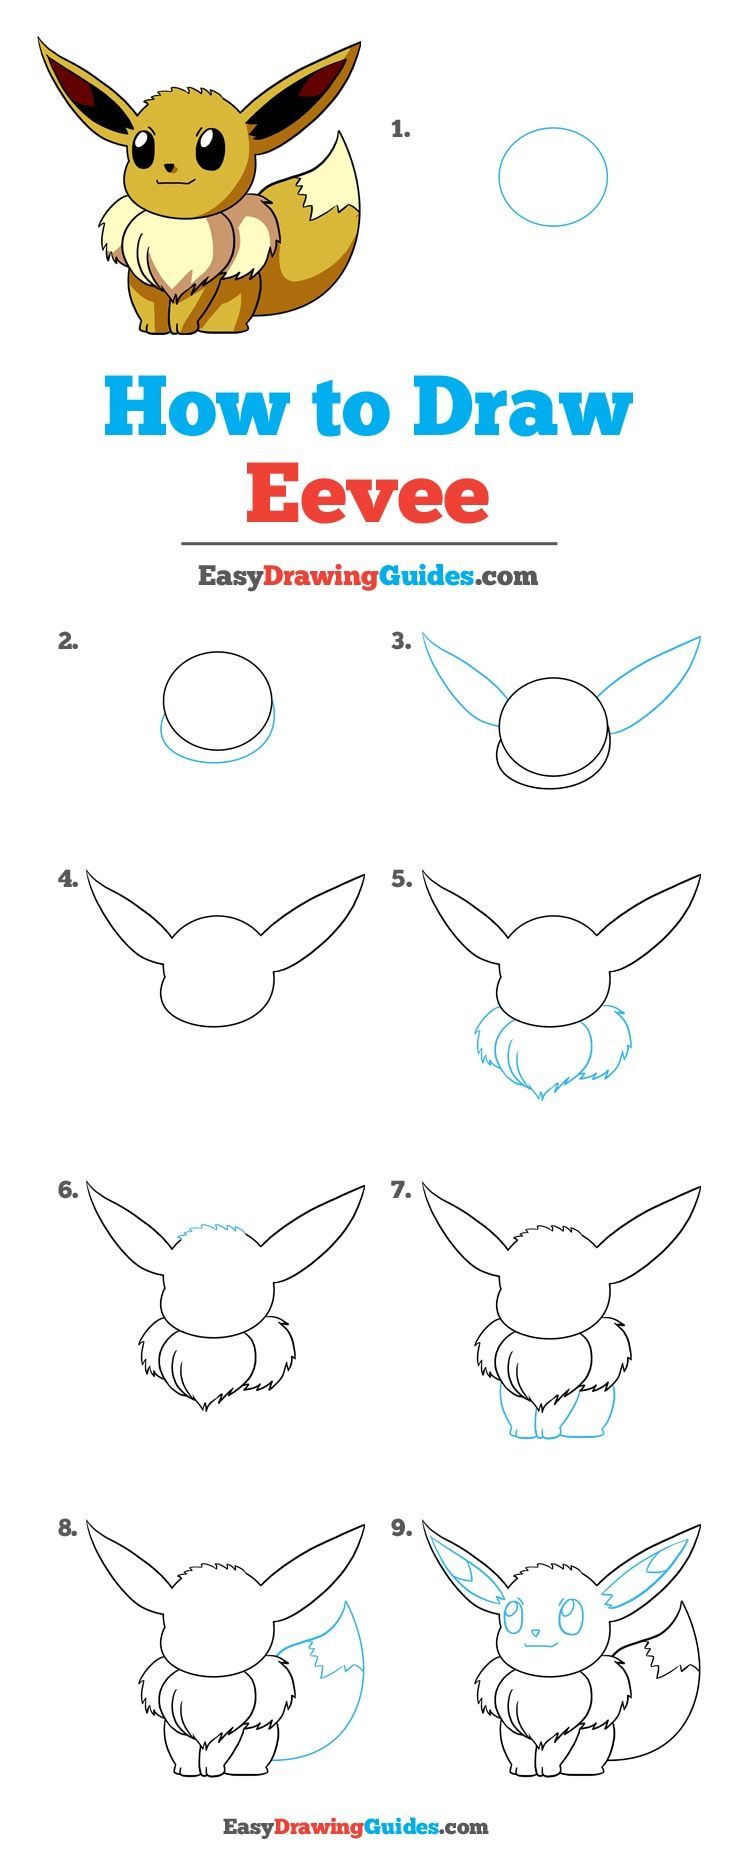 How to Draw Eevee from Pokémon | Drawing tutorials for beginners, Easy drawings, Drawing for beginne